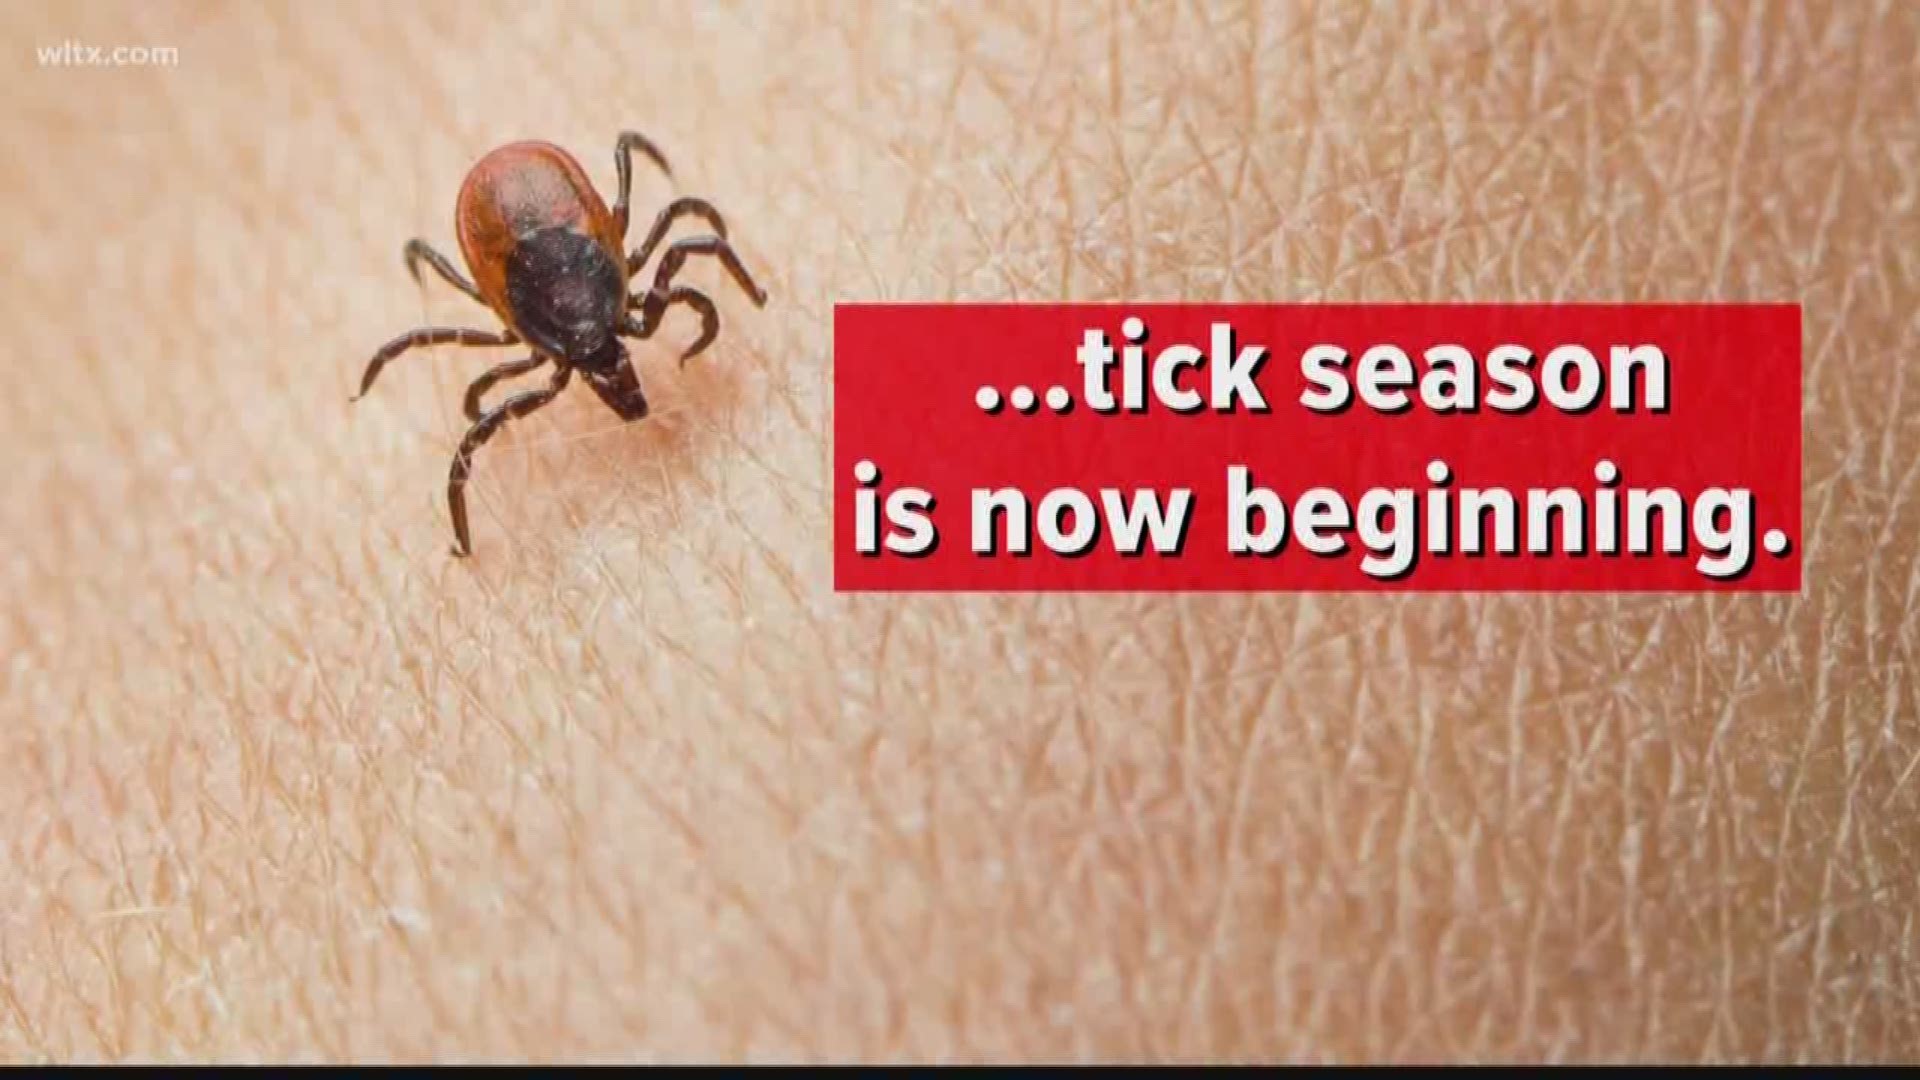 We have the details on why there has been an increase in illnesses caused by tick bites in the past couple years.